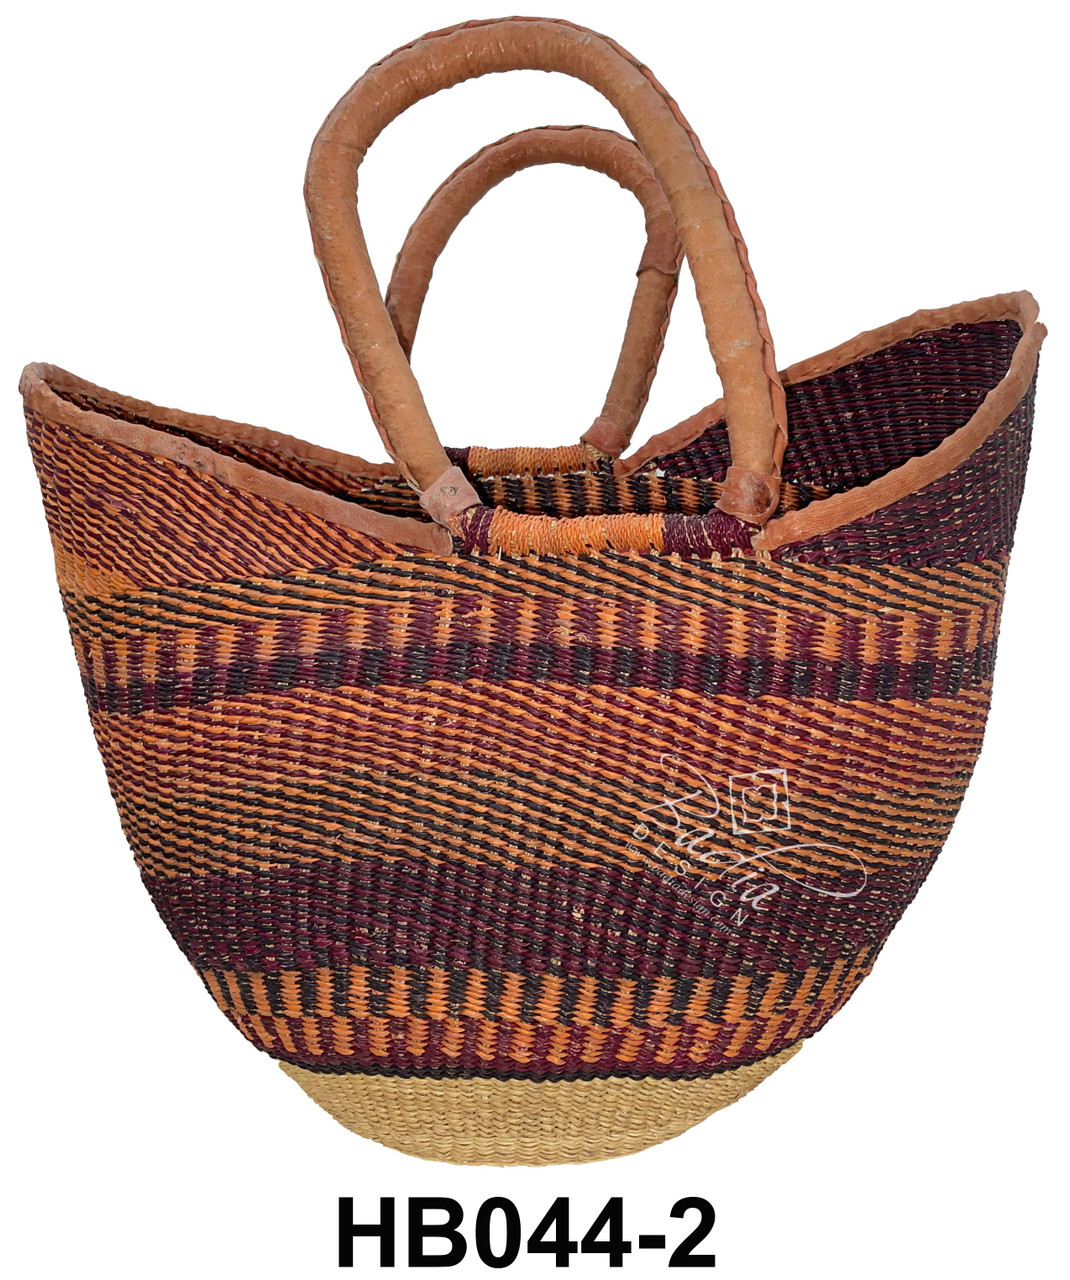 African Handwoven Straw Bags - HB044